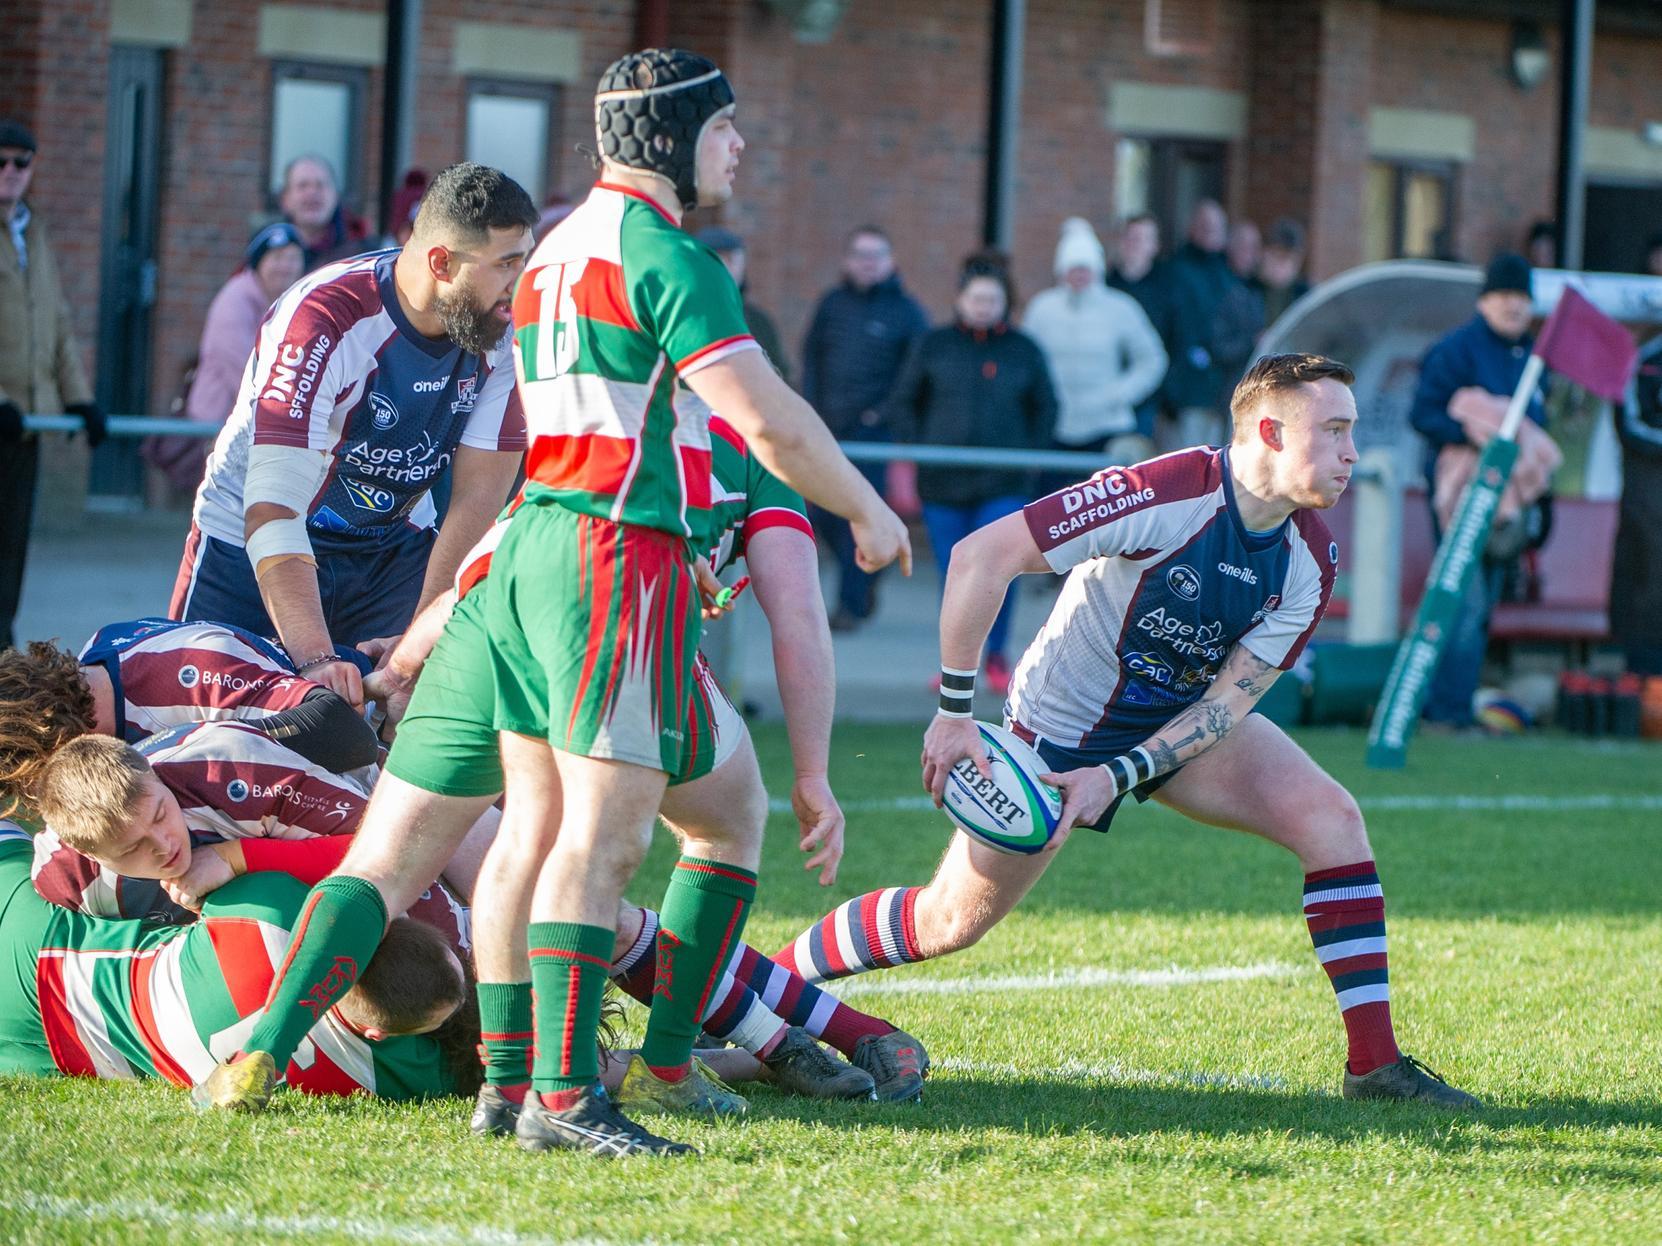 Scarborough RUFC v West Hartlepool

PHOTOS BY ANDY STANDING